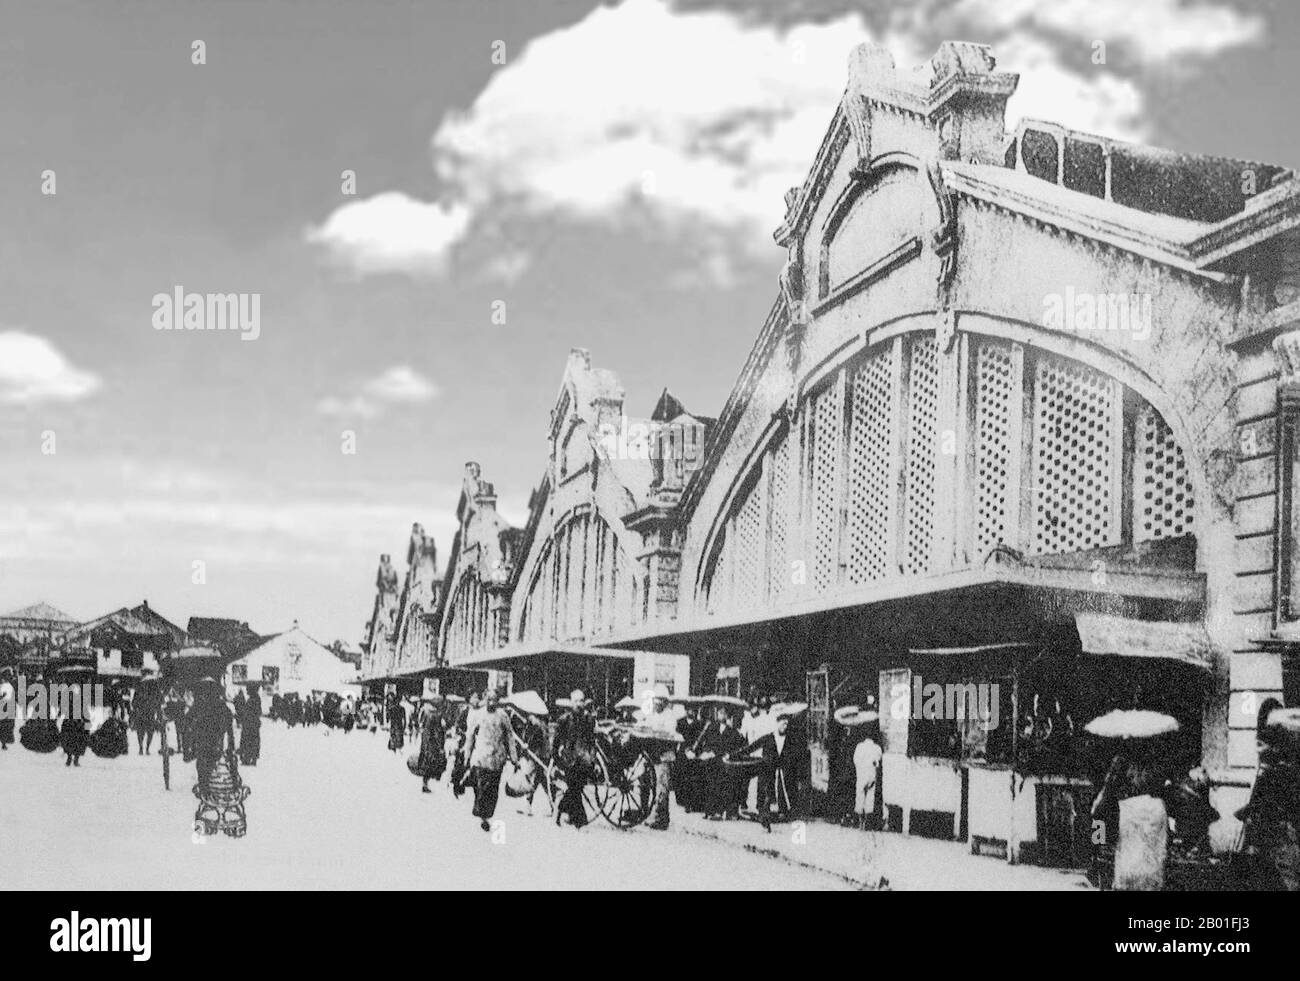 Vietnam: Dong Xuan Market, Hanoi, c. 1910.  Originally built by the French administration in 1889 in Old Quarter of Hanoi when the city's two main marketplaces, one at Hang Duong Street and the other at Hang Ma Street, were closed. The most recognisable feature of the market was the 5-arch entrance corresponding to Dong Xuan Market's five domes.  Dong Xuan Market has been renovated several times since, the latest in 1994 after a fire almost destroyed the market. Nowadays, Dong Xuan Market is the largest covered market in Hanoi. Stock Photo